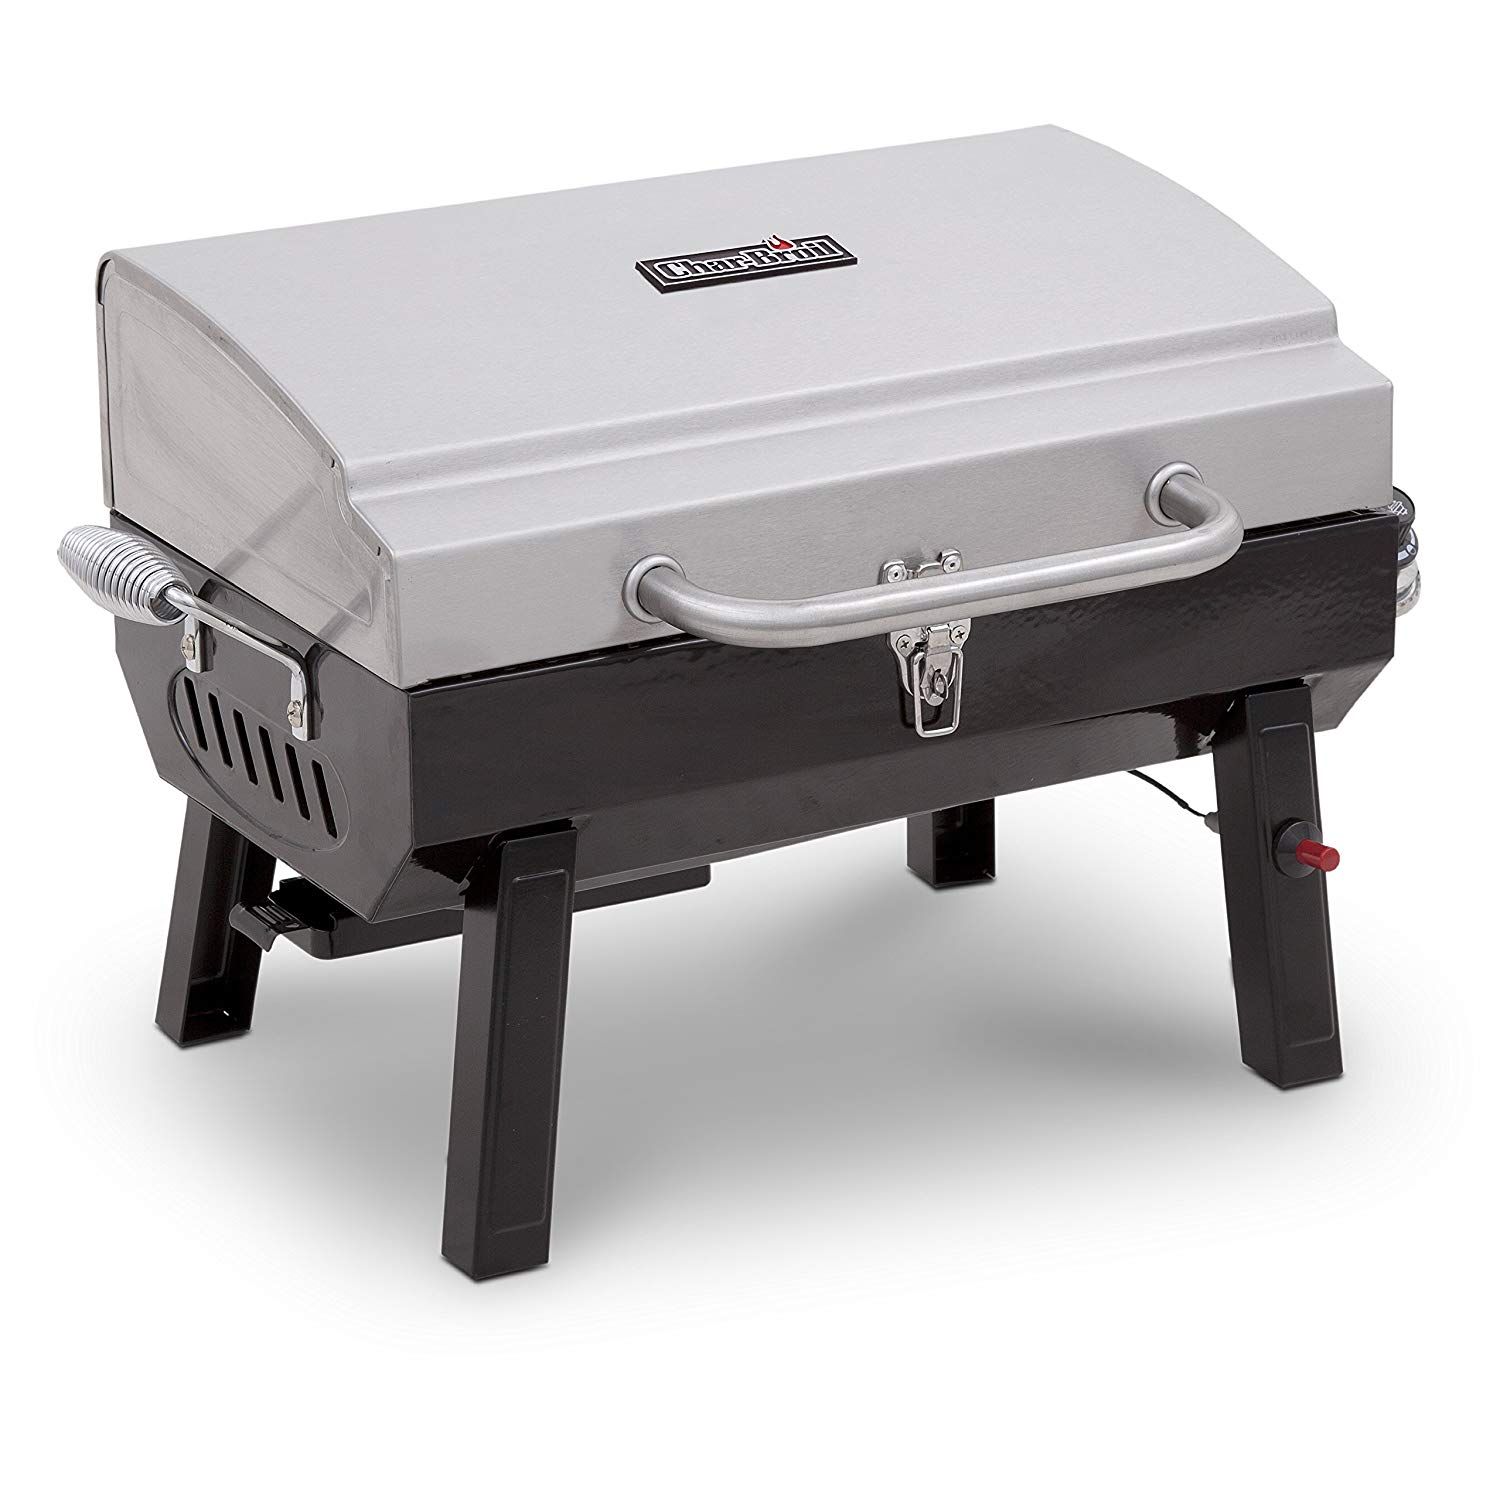 Electric Outdoor Grills For Sale - Buy Electric, Charcoal and Propane Grills At Best Prices